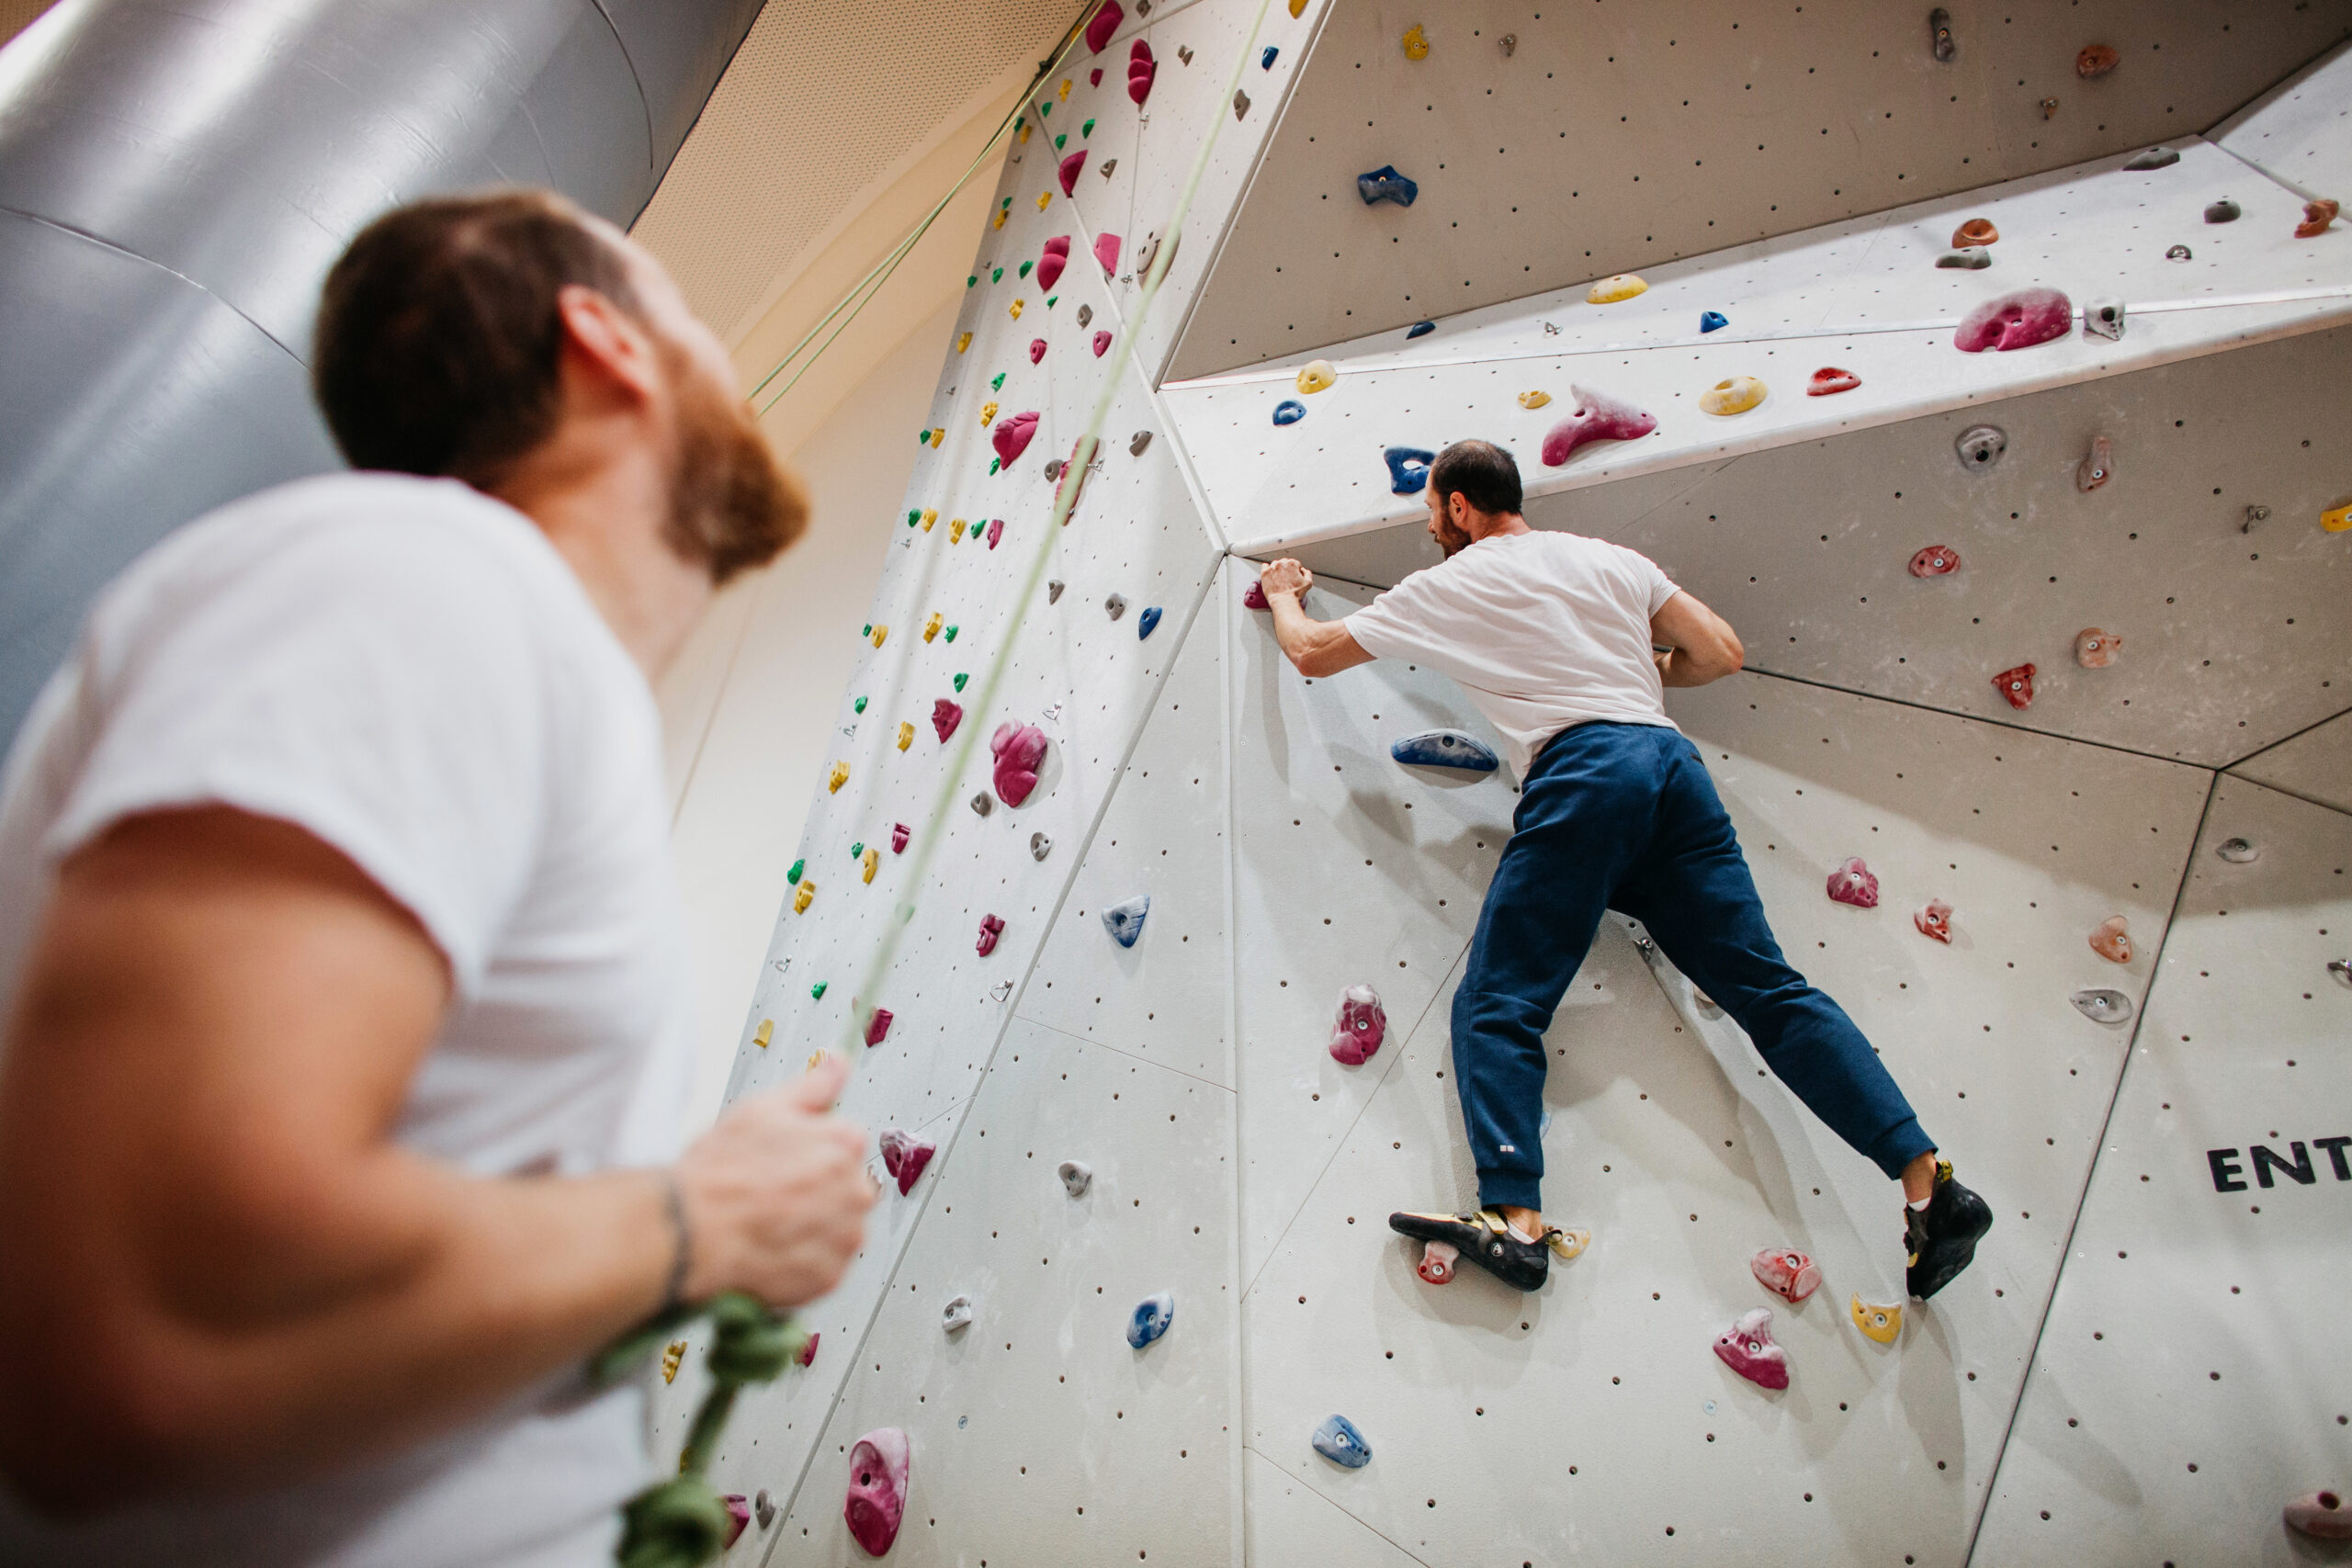 One male-presenting student free-climbs an indoor rock climbing wall while another male-presenting student belays.